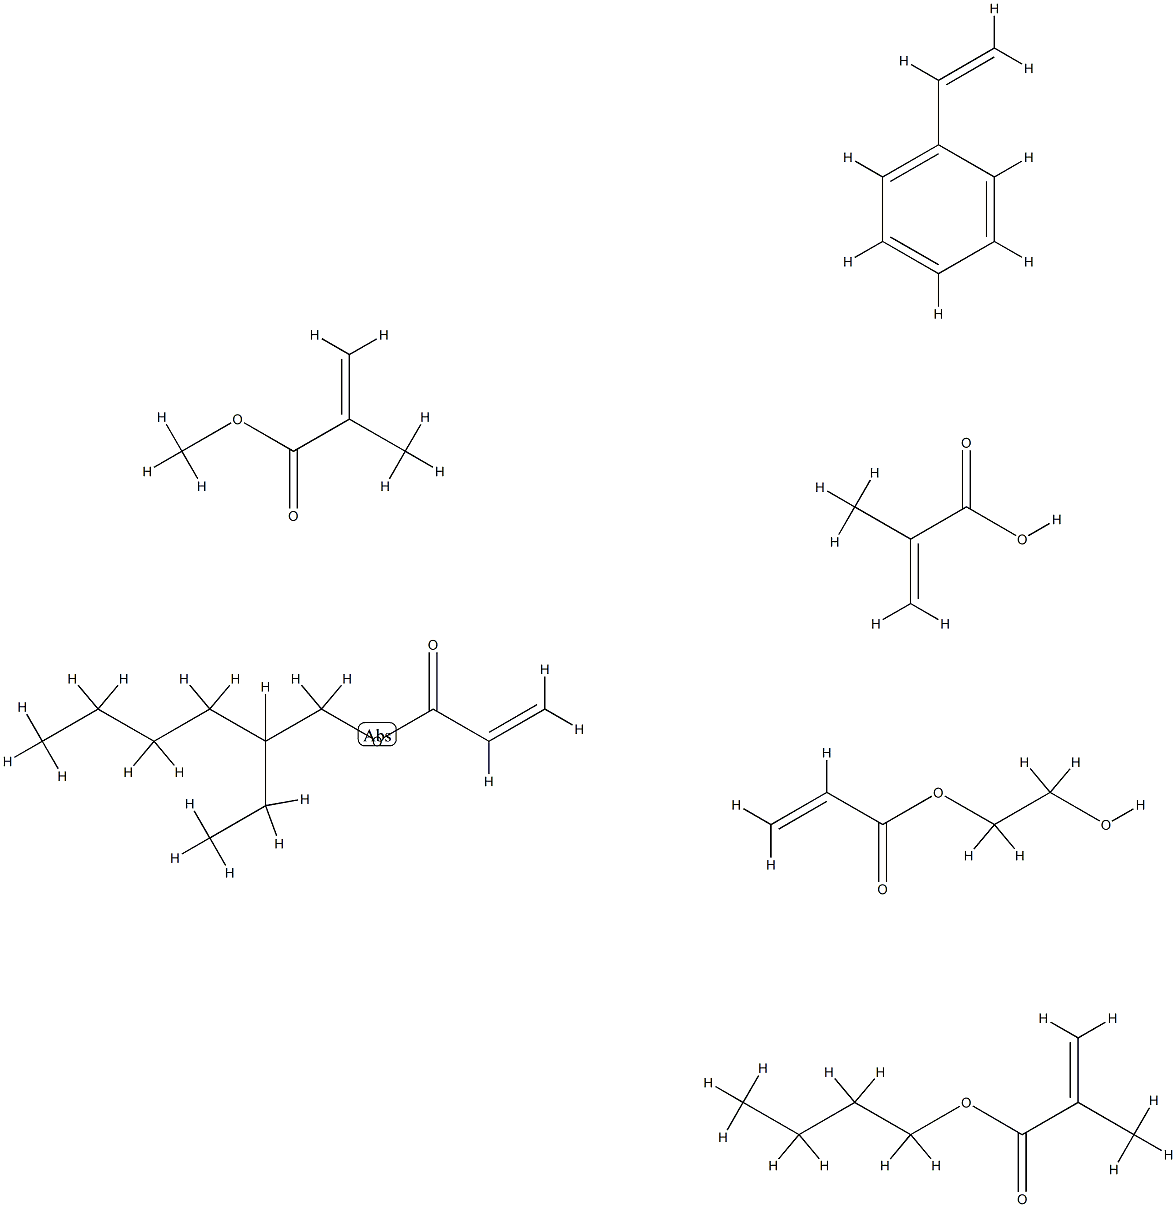 2-Propenoic acid, 2-methyl-, polymer with butyl 2-methyl-2-propenoate, ethenylbenzene, 2-ethylhexyl 2-propenoate, 2-hydroxyethyl 2-propenoate and methyl 2-methyl-2-propenoate Structure